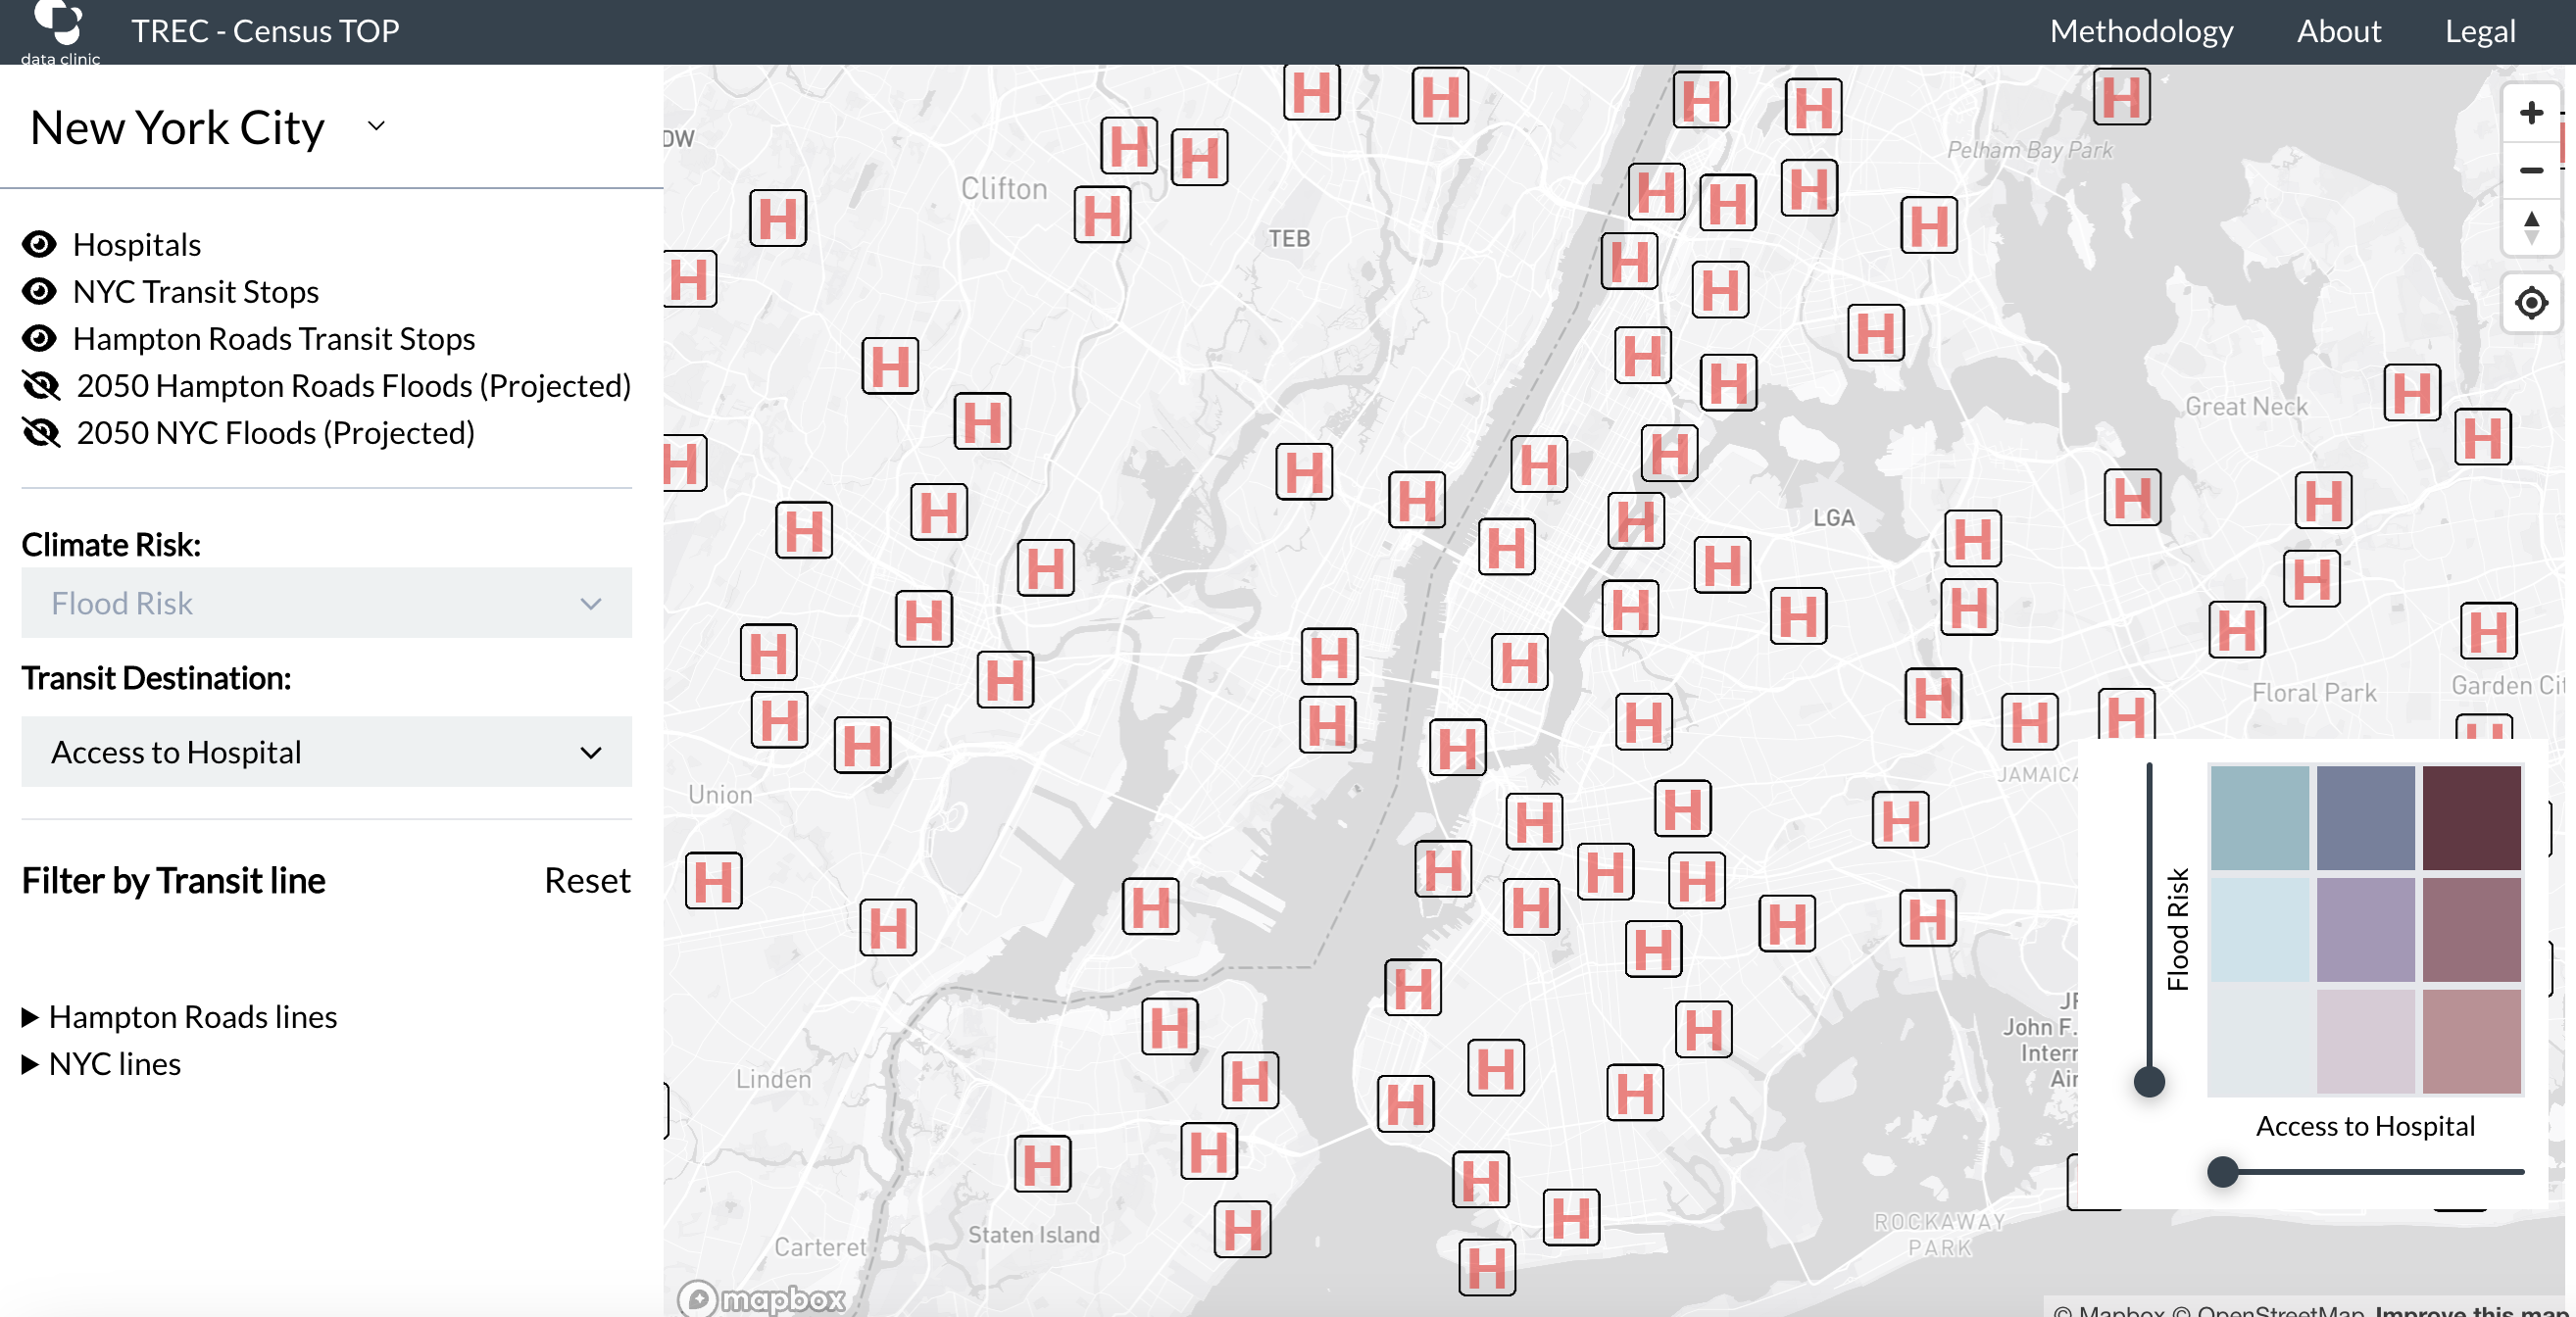 An interactive map of New York City showing hospital and transit stop locations.